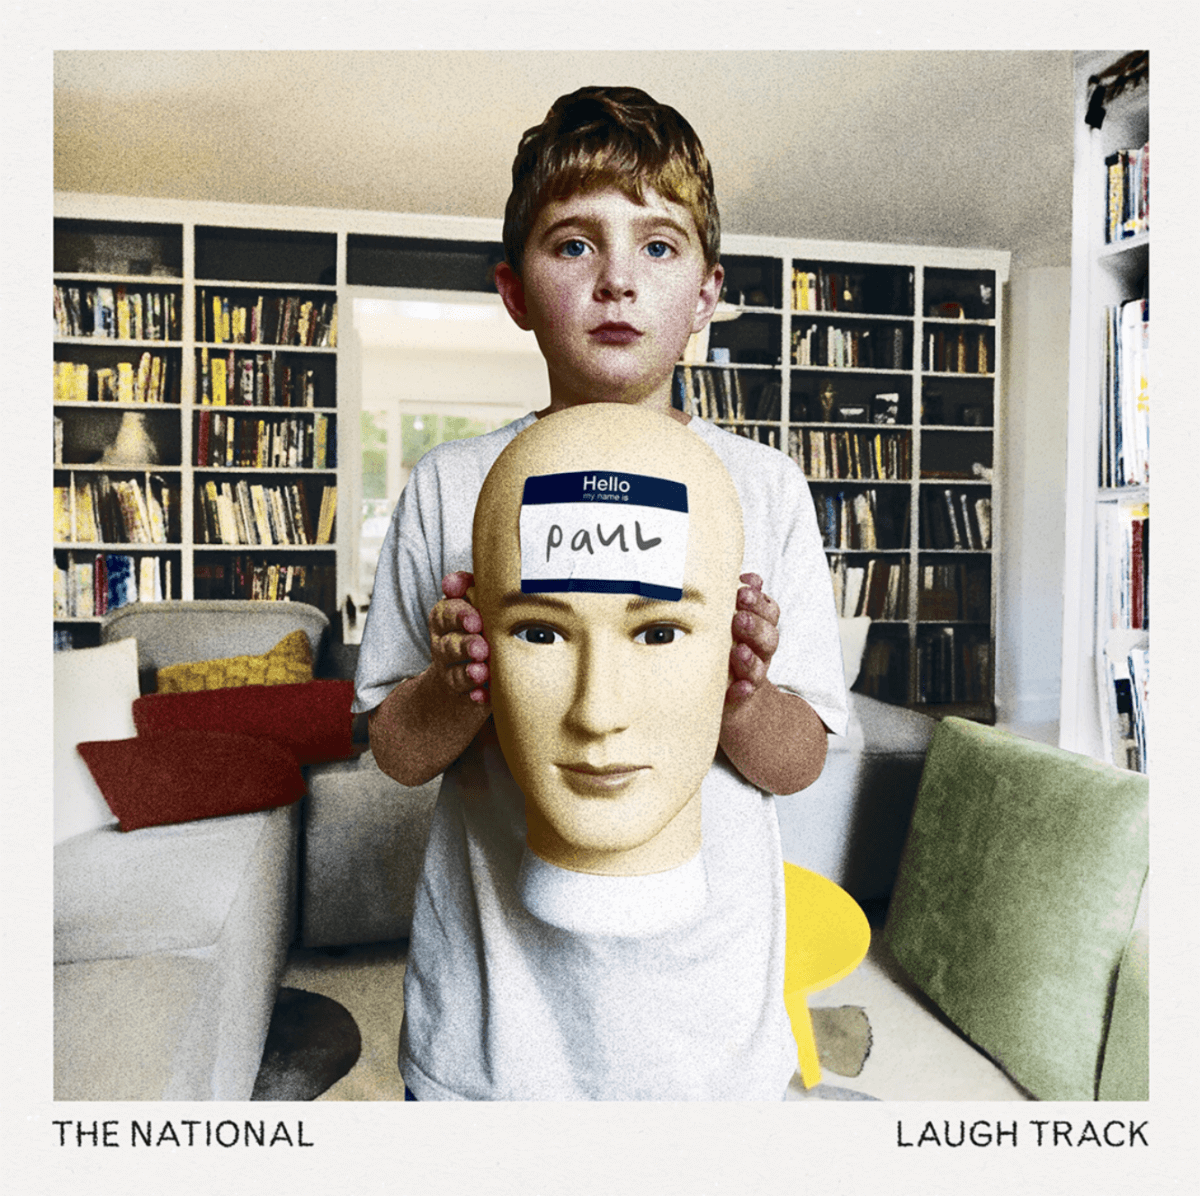 Laugh Track by The National album review by Ryan Meyer for Northern Transmissions. The band's full-length is now available via 4AD and DSPs